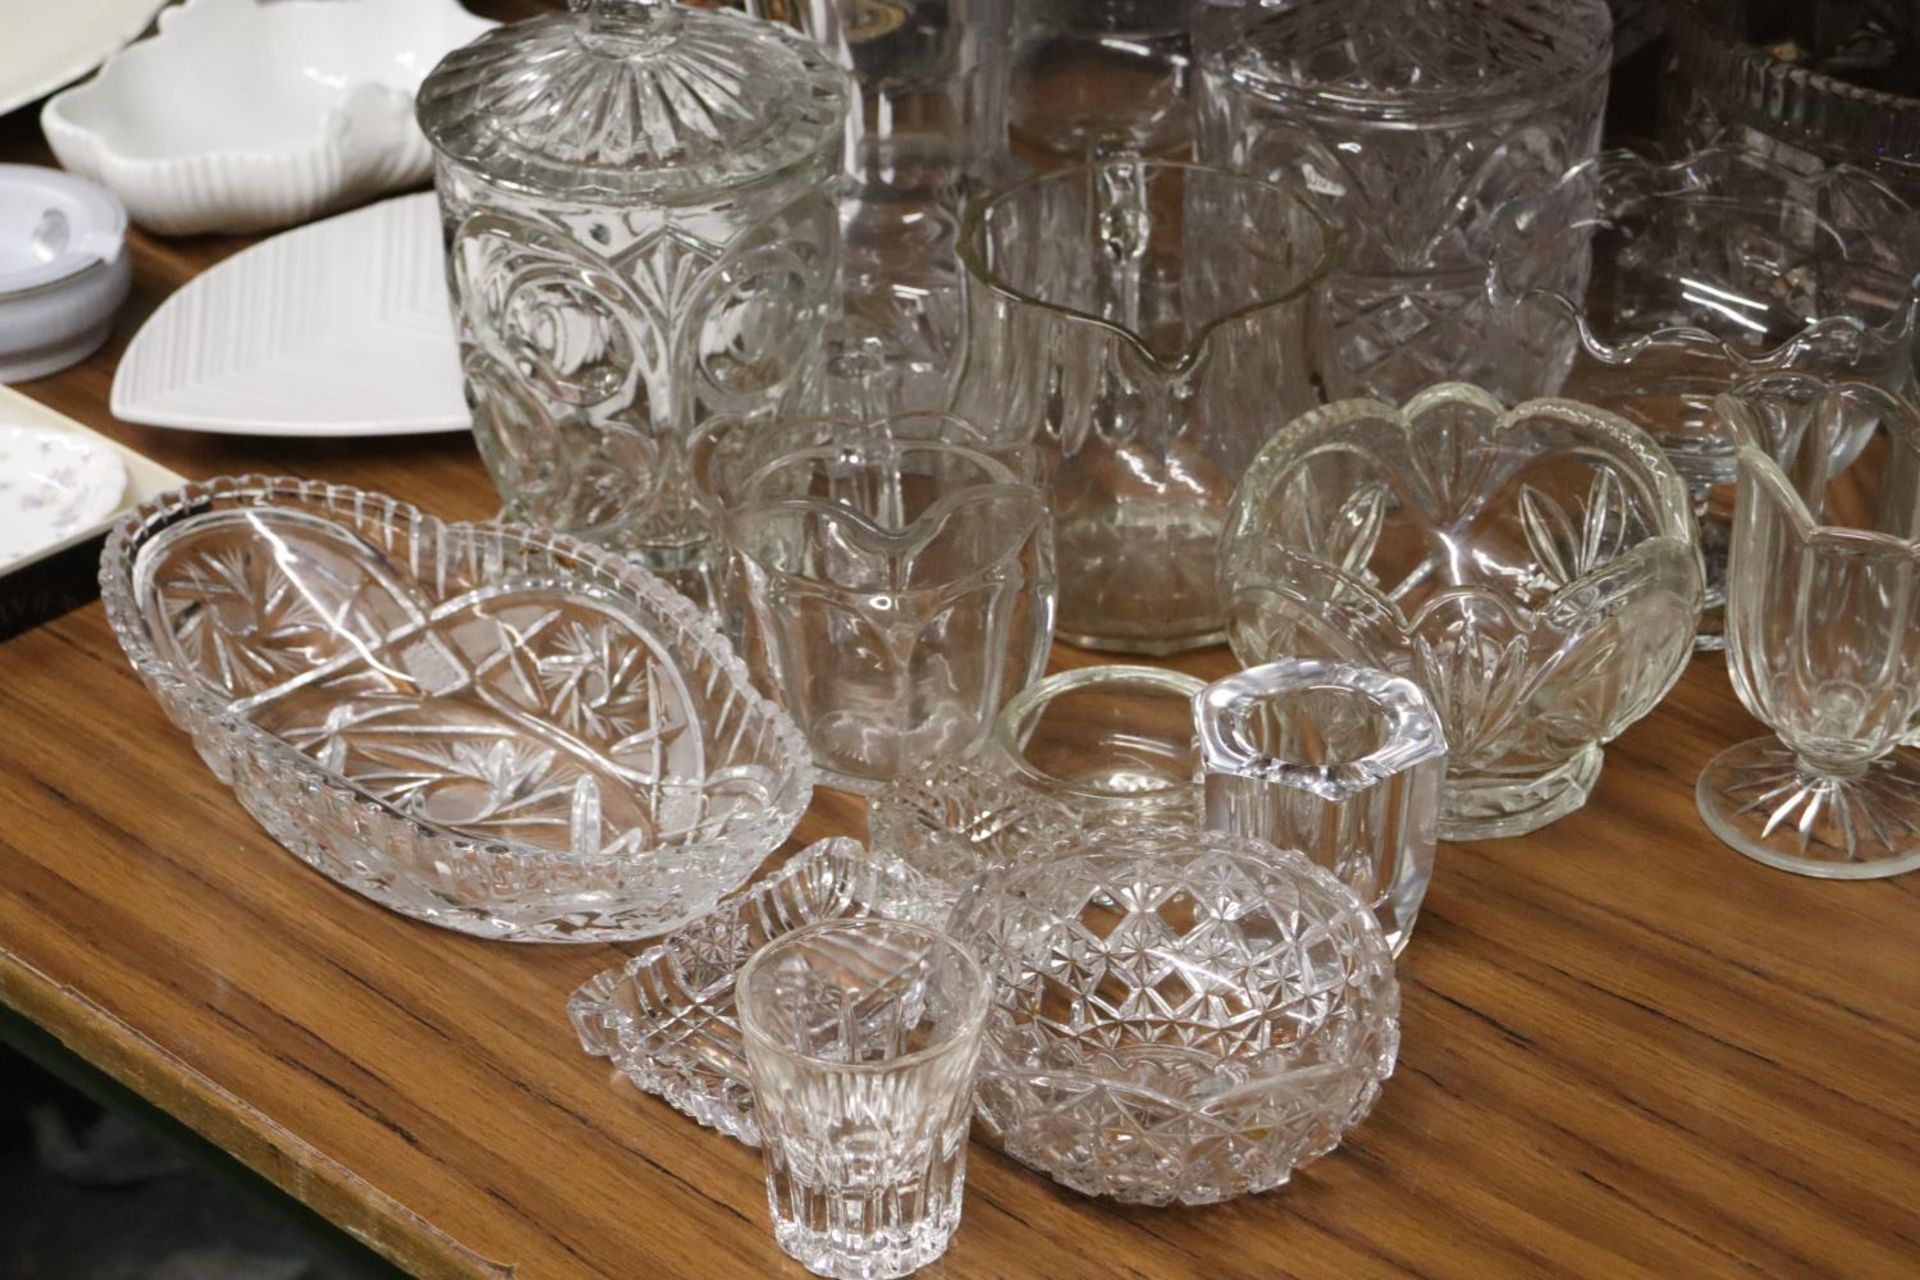 A LARGE QUANTITY OF GLASSWARE TO INCLUDE BOWLS, JUGS, LIDDED CONTAINERS, ETC - Bild 5 aus 5